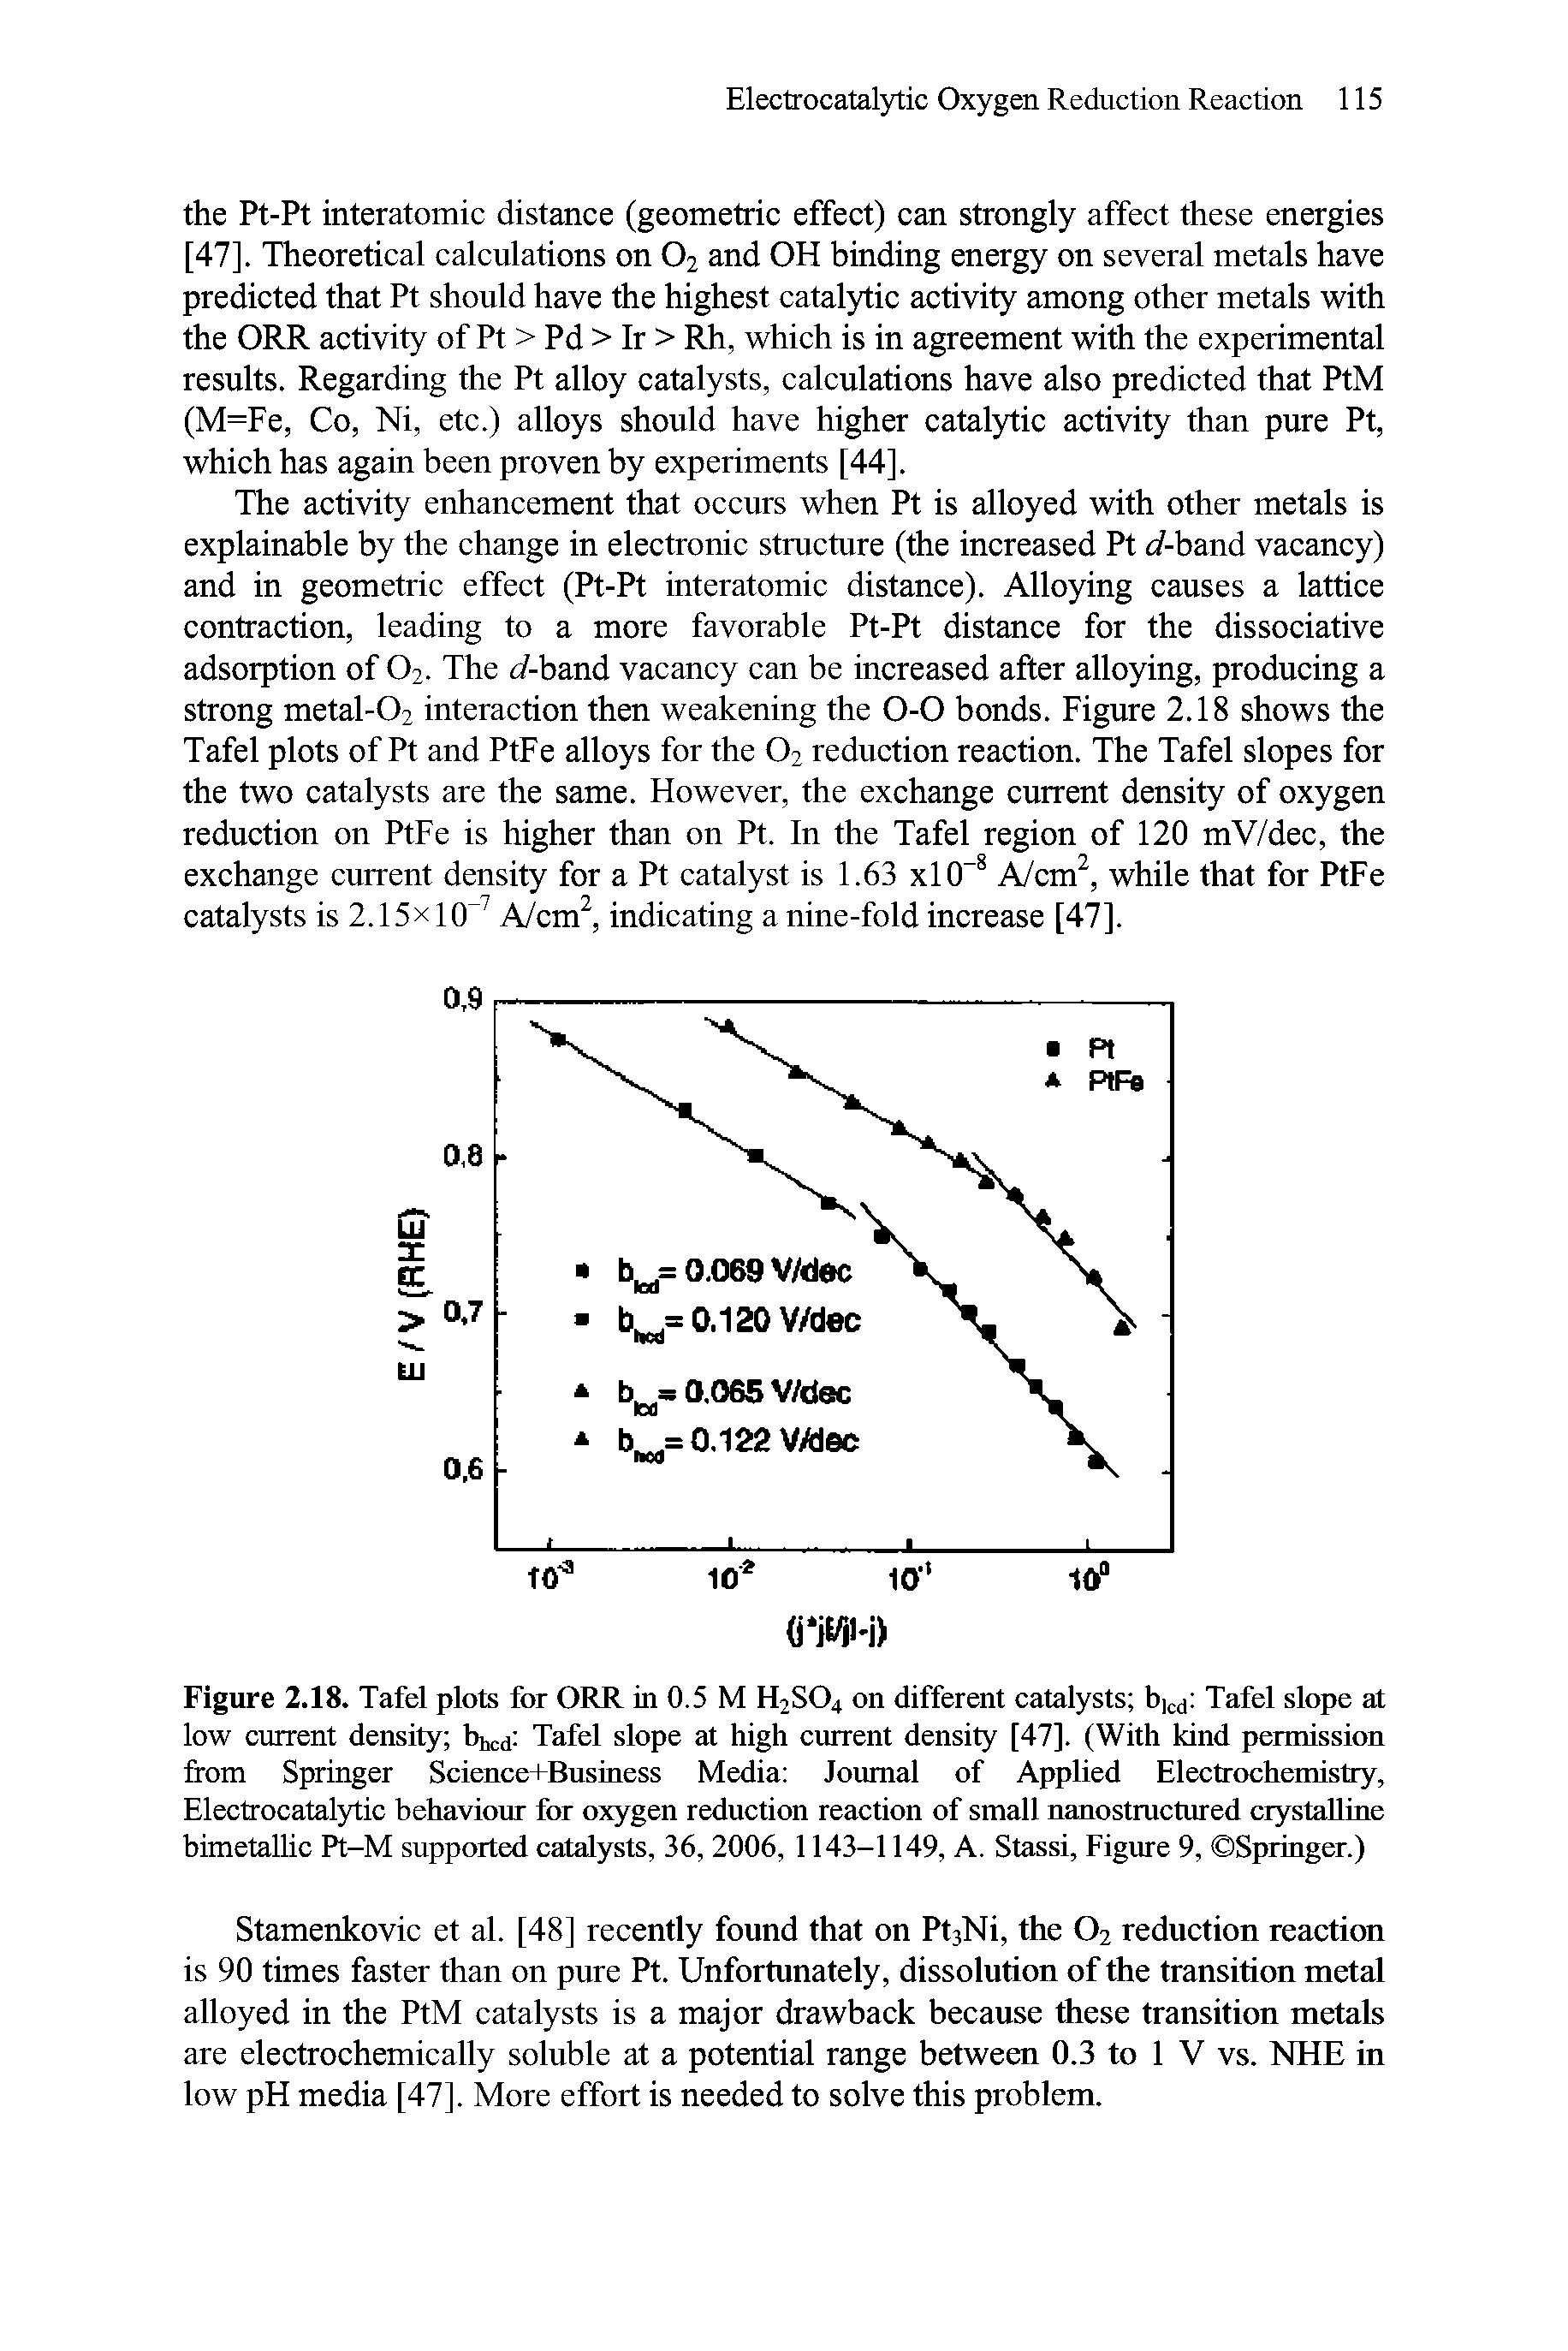 Figure 2.18. Tafel plots for ORR in 0.5 M H2SO4 on different catalysts bjcdi Tafel slope at low current density bhcd Tafel slope at high current density [47]. (With kind permission from Springer Science+Business Media Journal of Applied Electrochemistry, Electrocatalytic hehaviour for oxygen reduction reaction of small nanostructured erystaUme himetaUic Pt-M supported catalysts, 36, 2006, 1143-1149, A. Stassi, Figure 9, Springer.)...